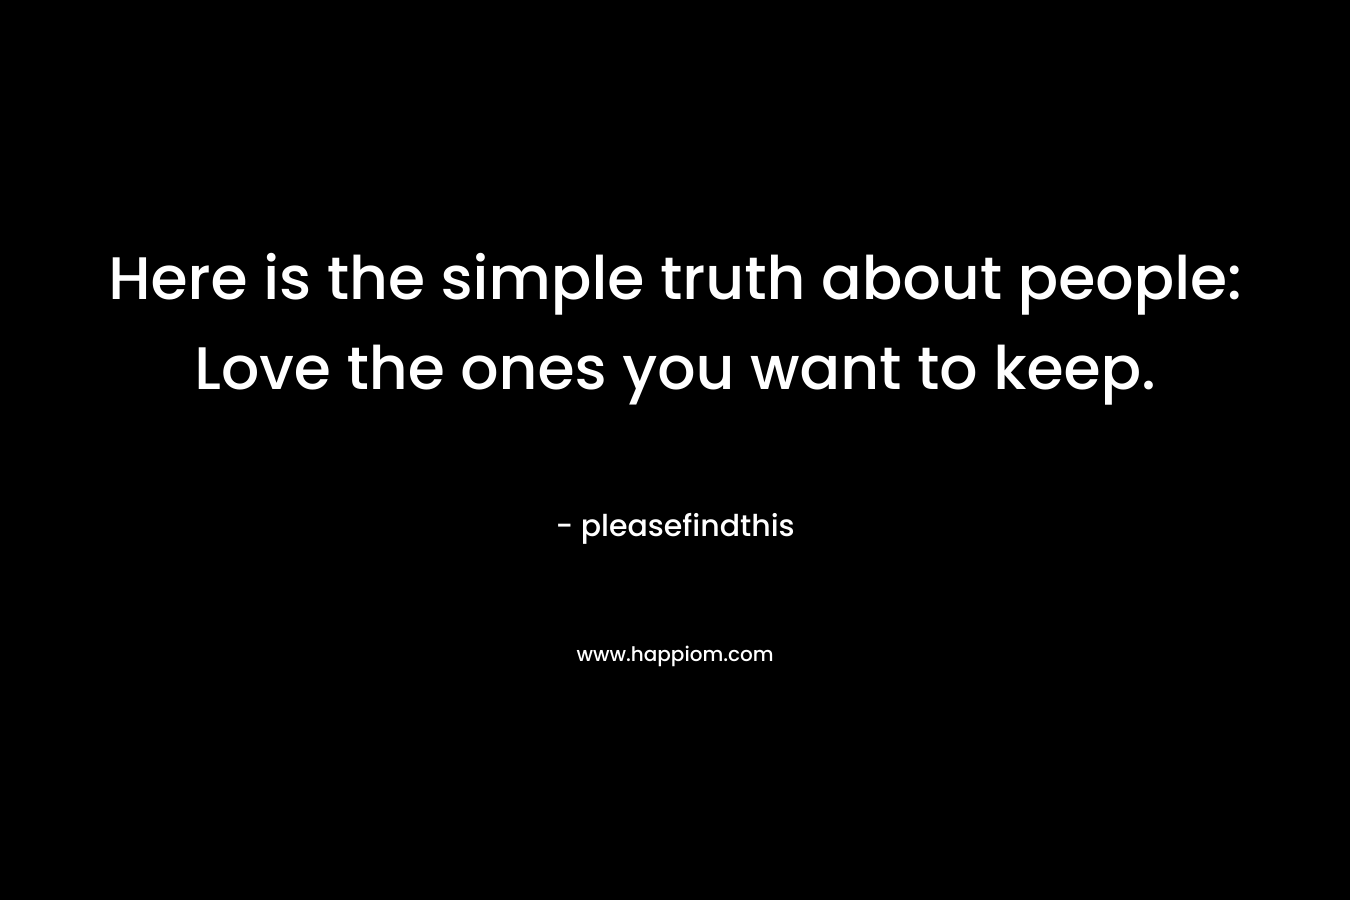 Here is the simple truth about people: Love the ones you want to keep. – pleasefindthis